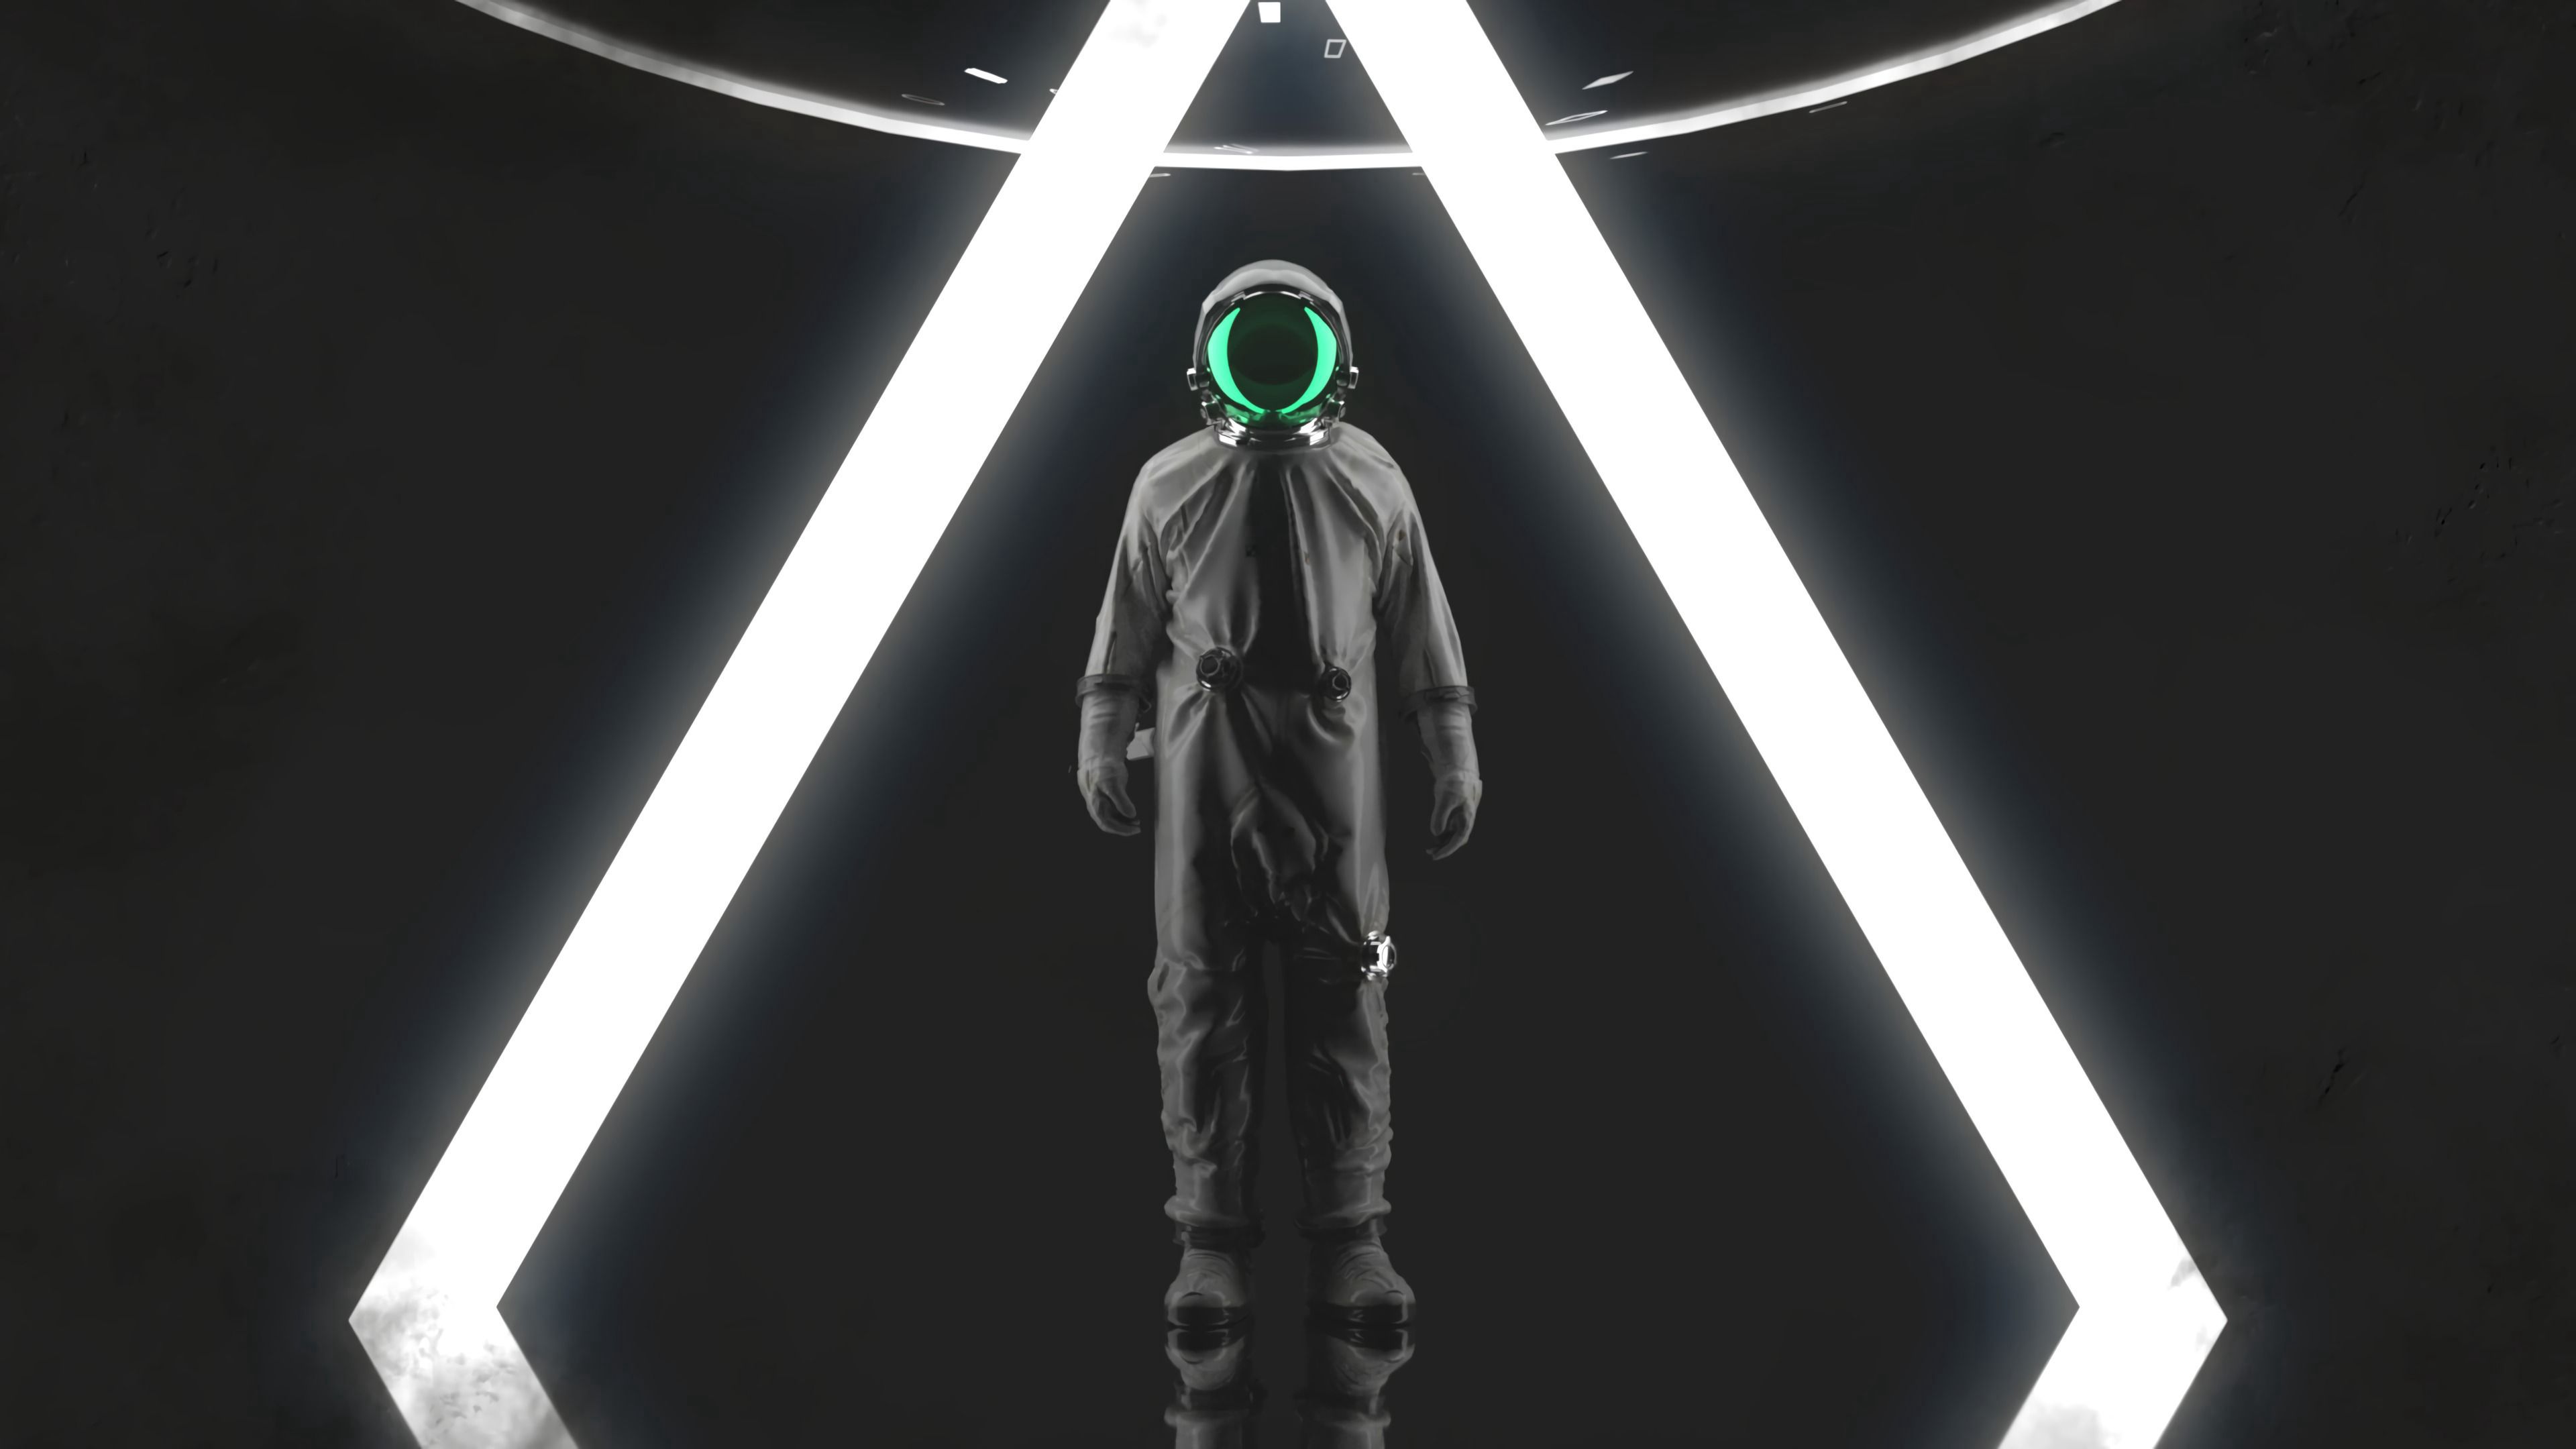 miscellanea, space suit, spacesuit, triangle New Lock Screen Backgrounds